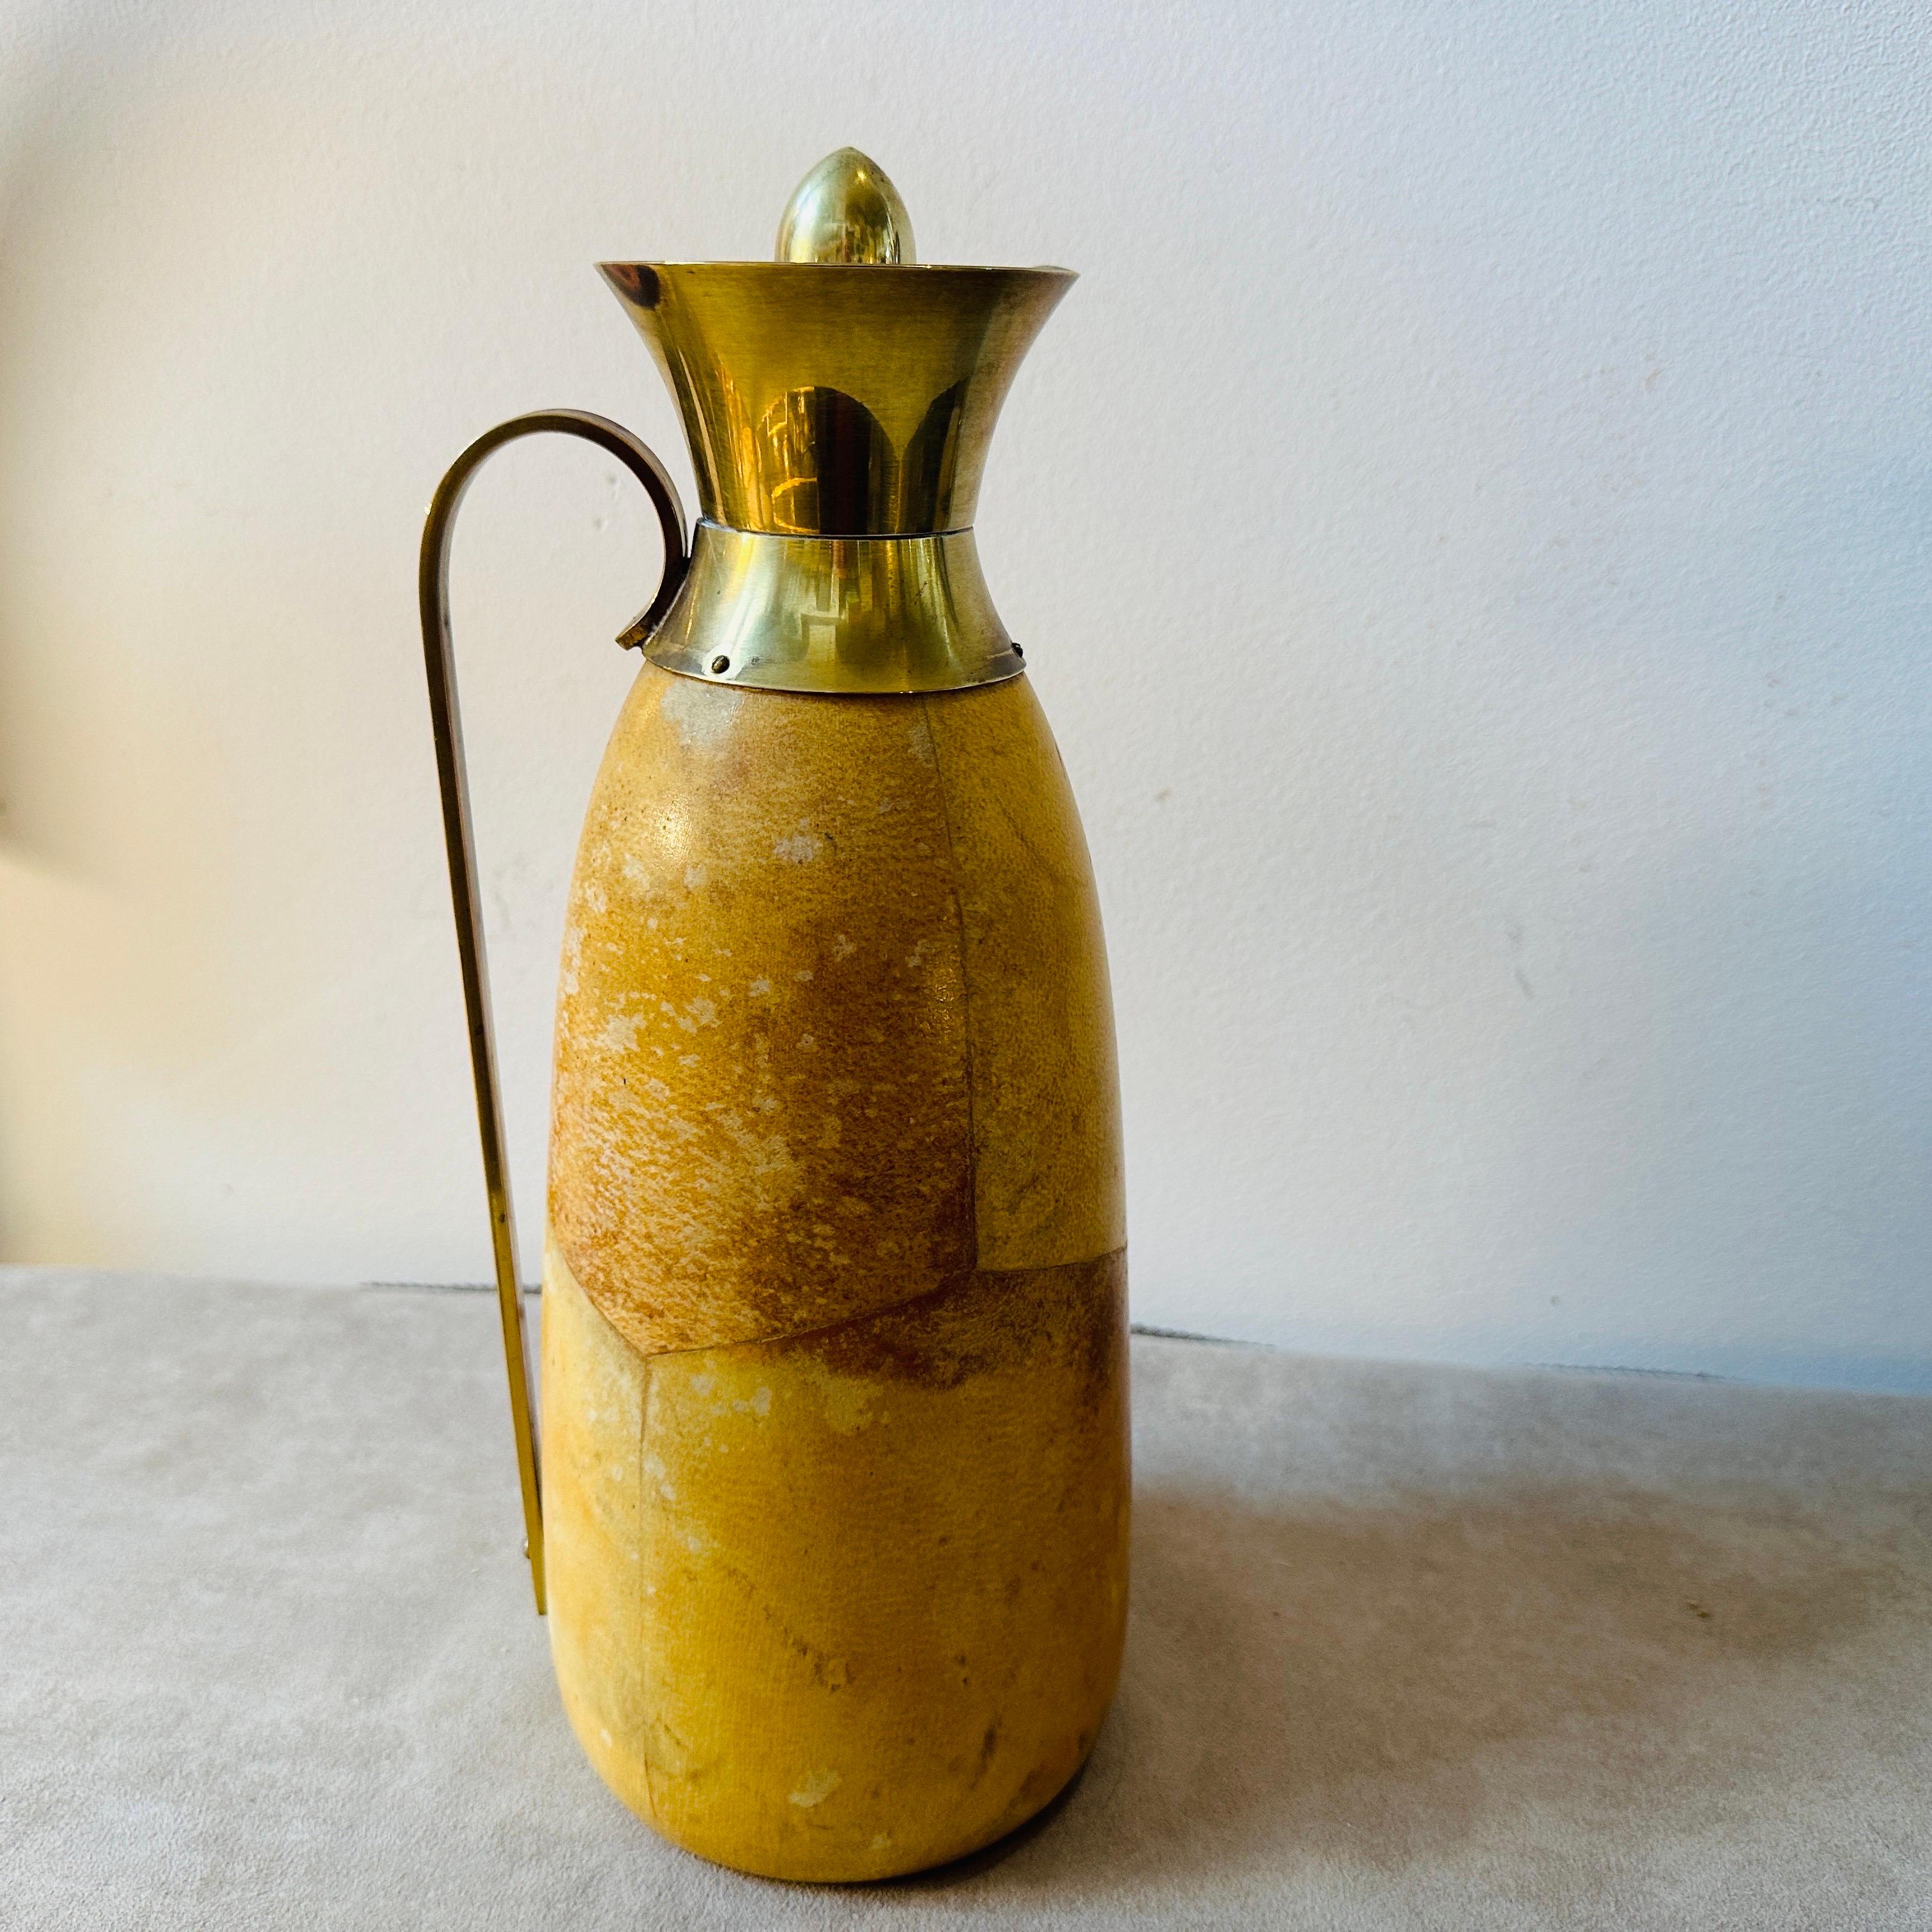 A thermos carafe designed by Aldo Tura, it has been manufactured in Milano in the Fifties by Macabo, it's in vintage conditions with signs of use and age visible on there photos. This carafe showcases the distinctive design characteristics